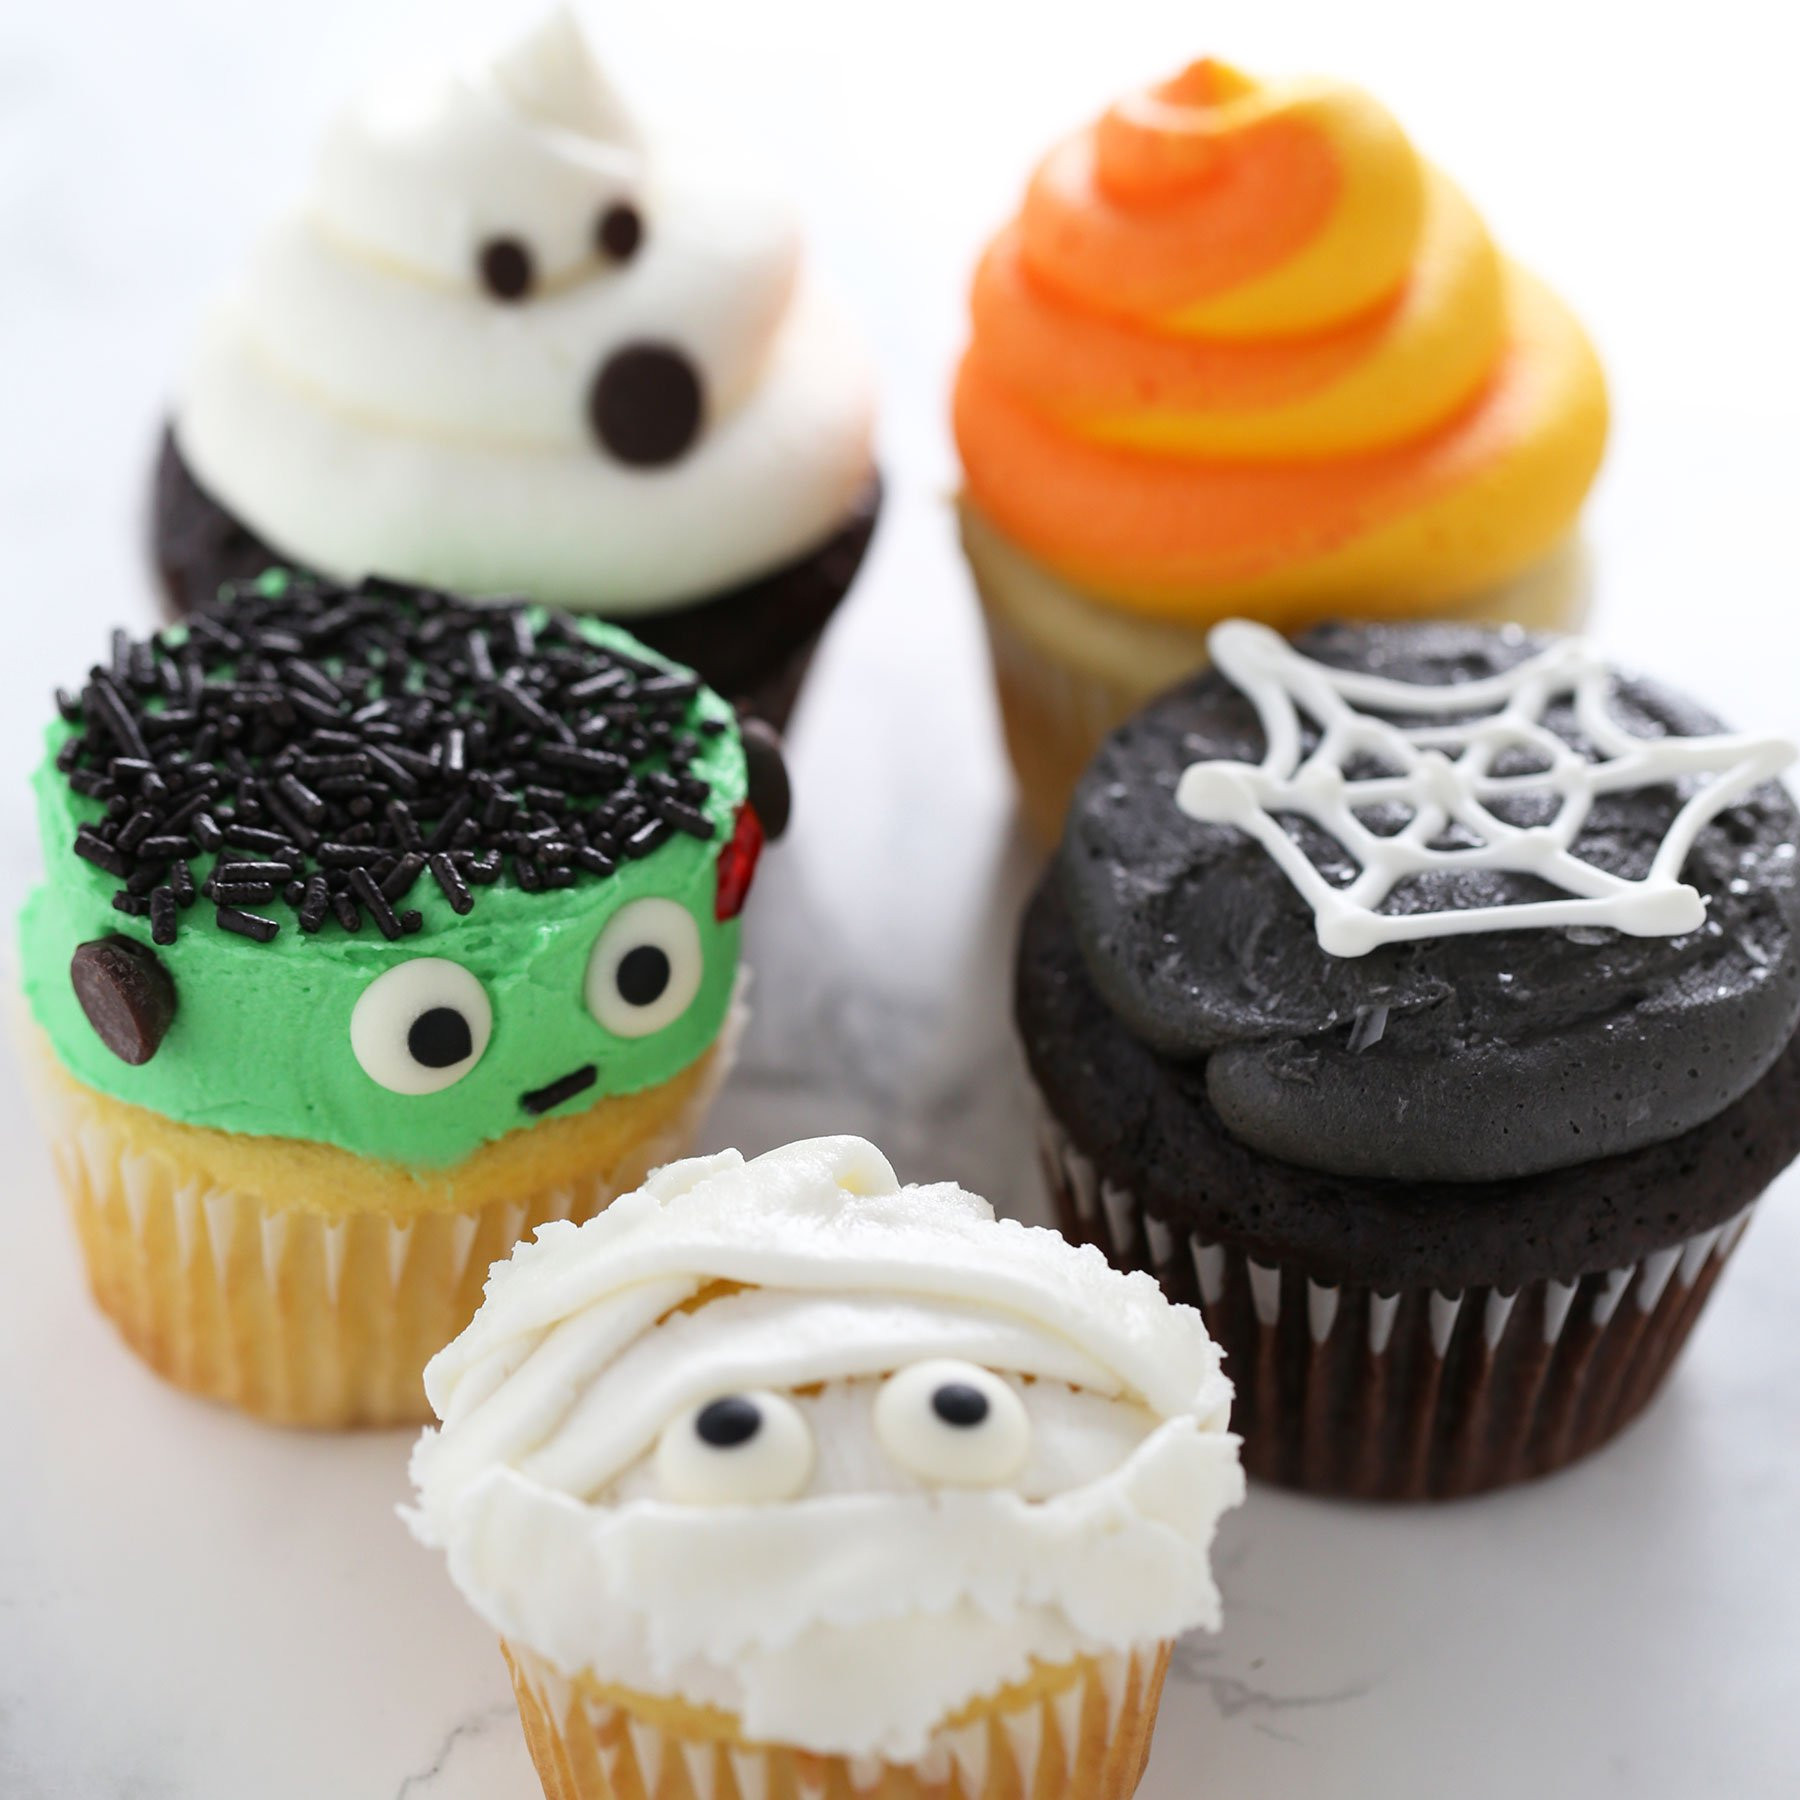 Halloween Cupcakes Decorations
 How to Make Halloween Cupcakes Handle the Heat